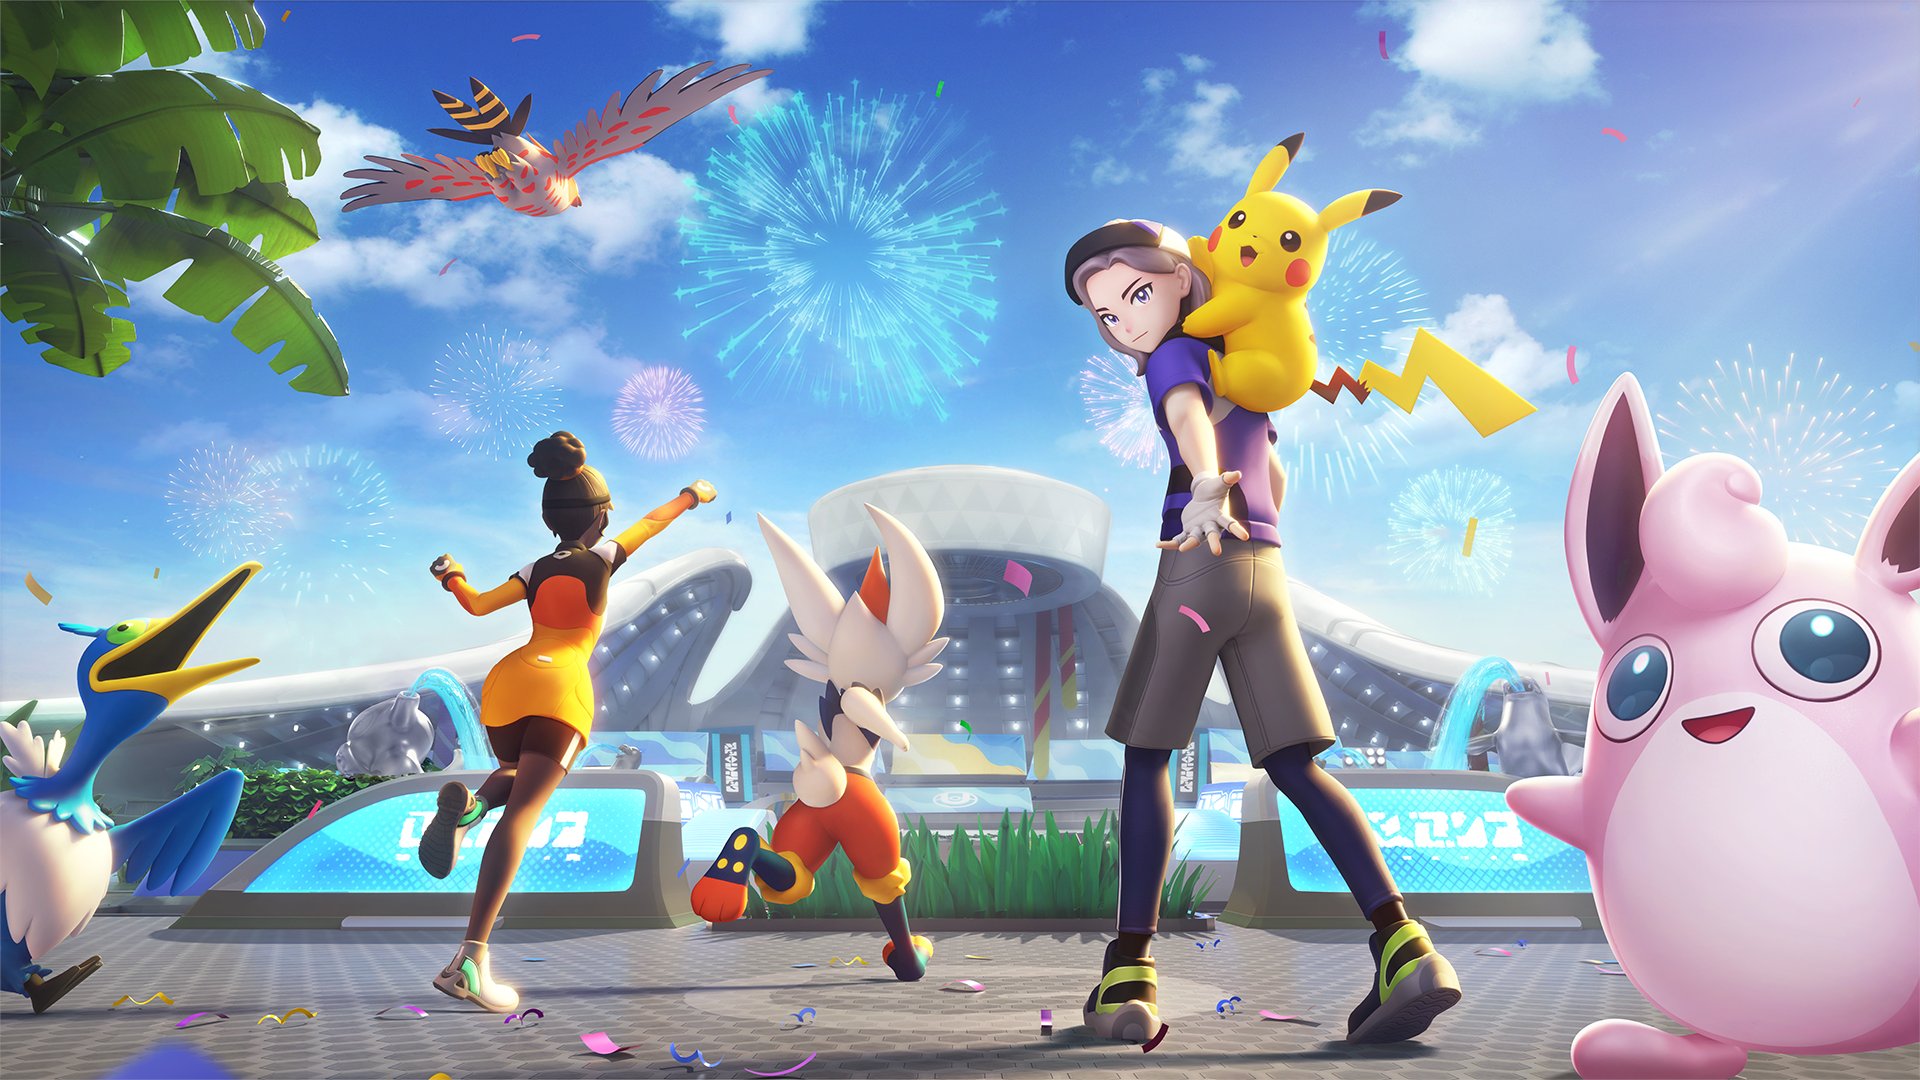 Pokémon Switch games: A promotional render for Pokémon UNITE, featuring trainers and a number of Pokémon, including Wigglytuff and Pikachu, walking towards a stadium.